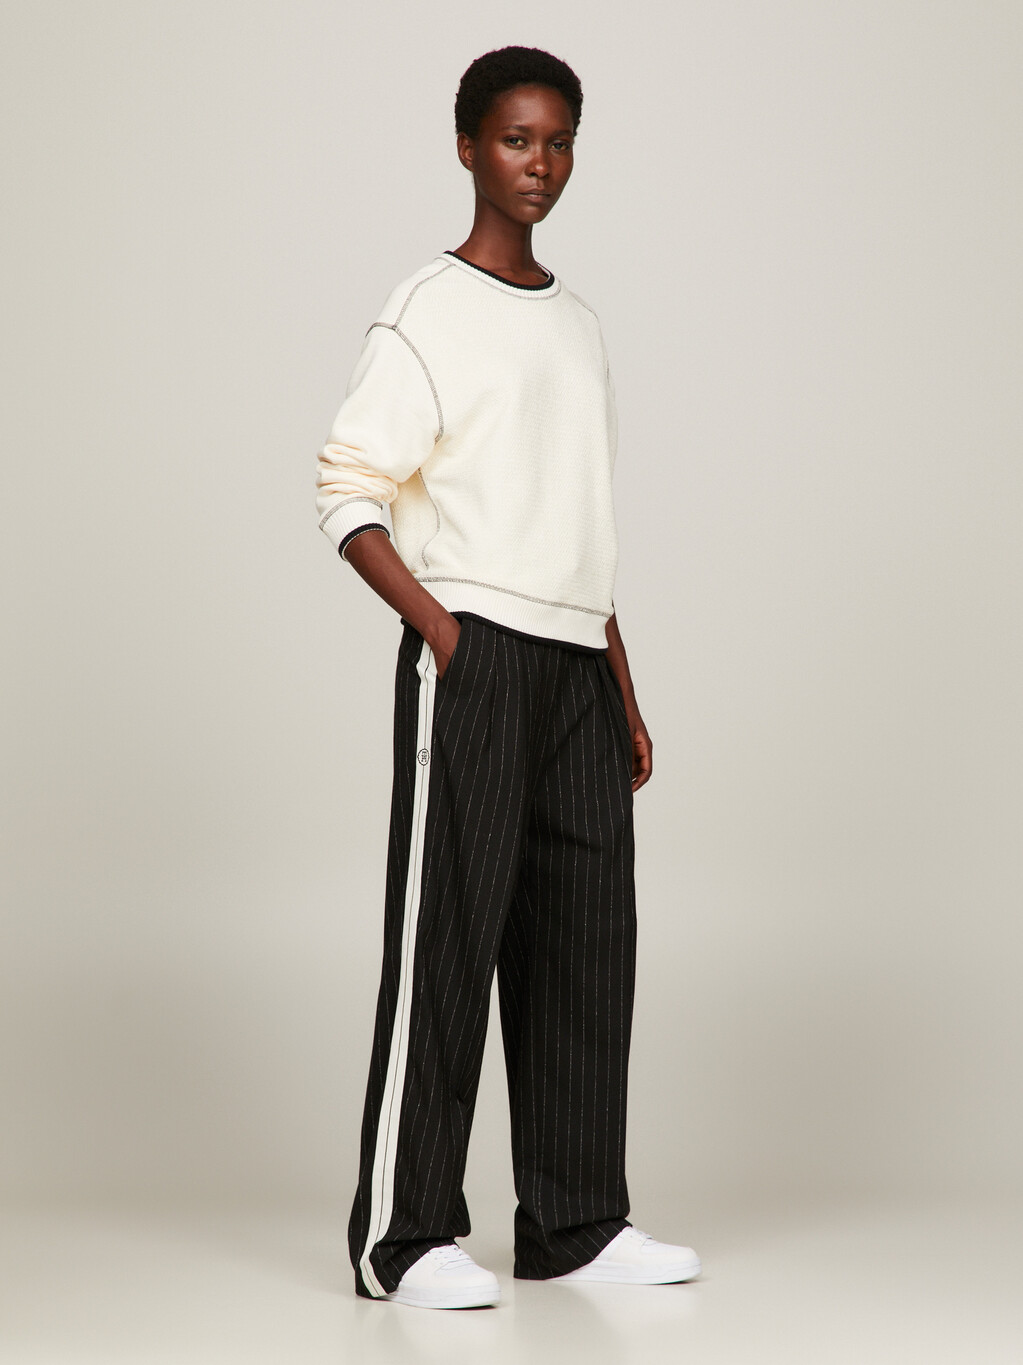 Pinstripe Straight Leg Relaxed Fit Trousers, Black Stripe, hi-res